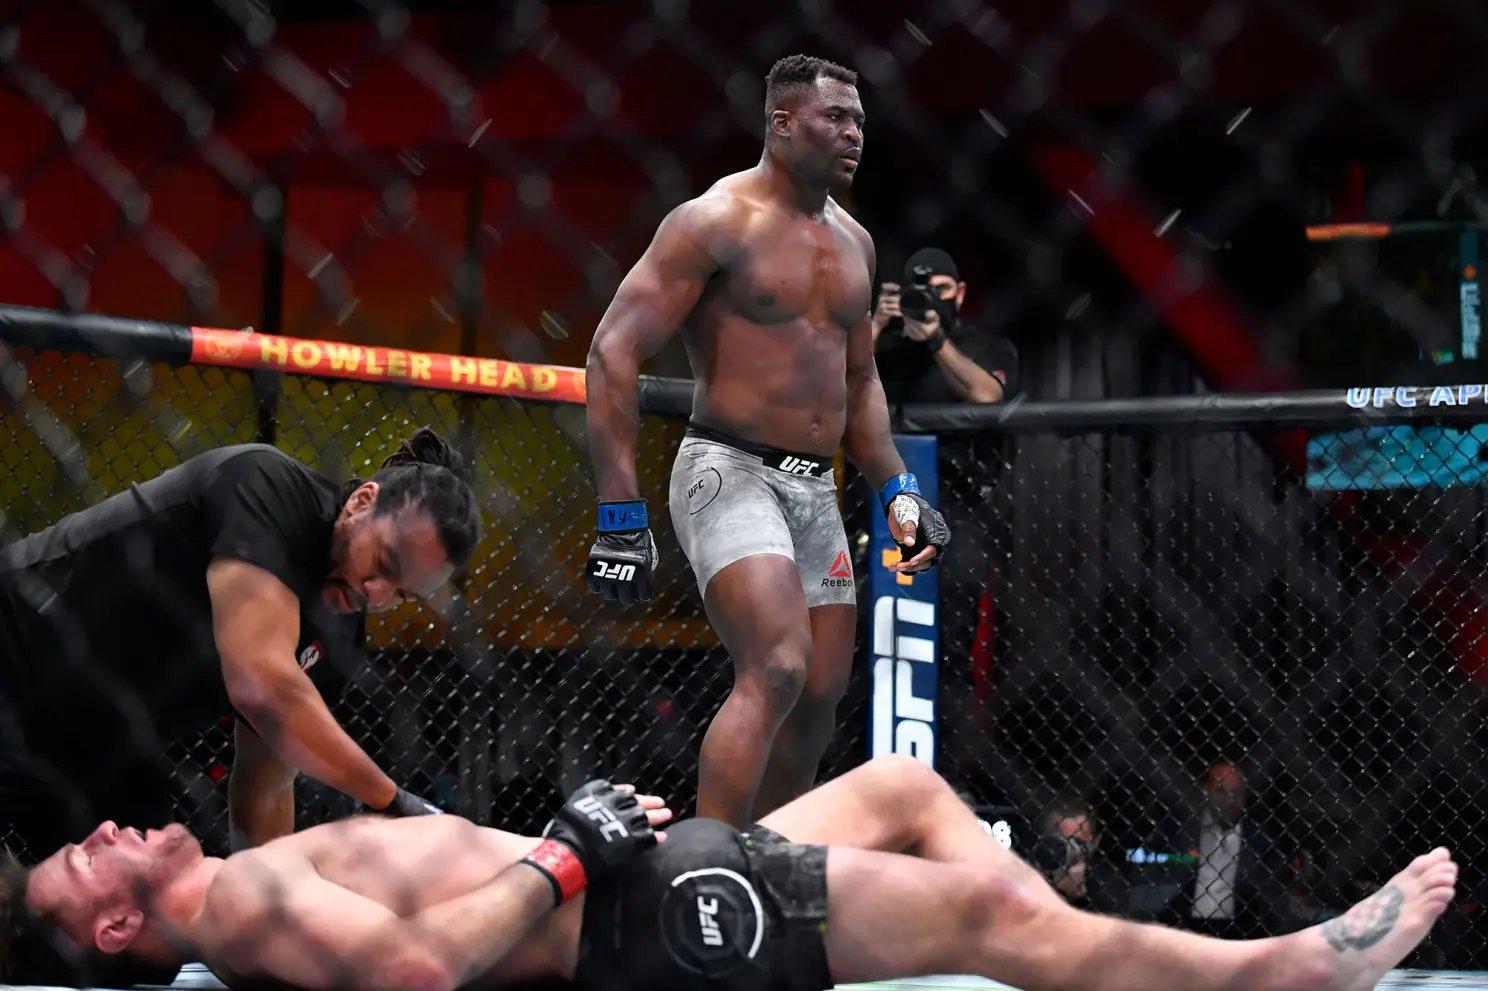 Francis Ngannou seconds after knocking out Stipe Miocic. Credit: UFC/Zuffa LLC